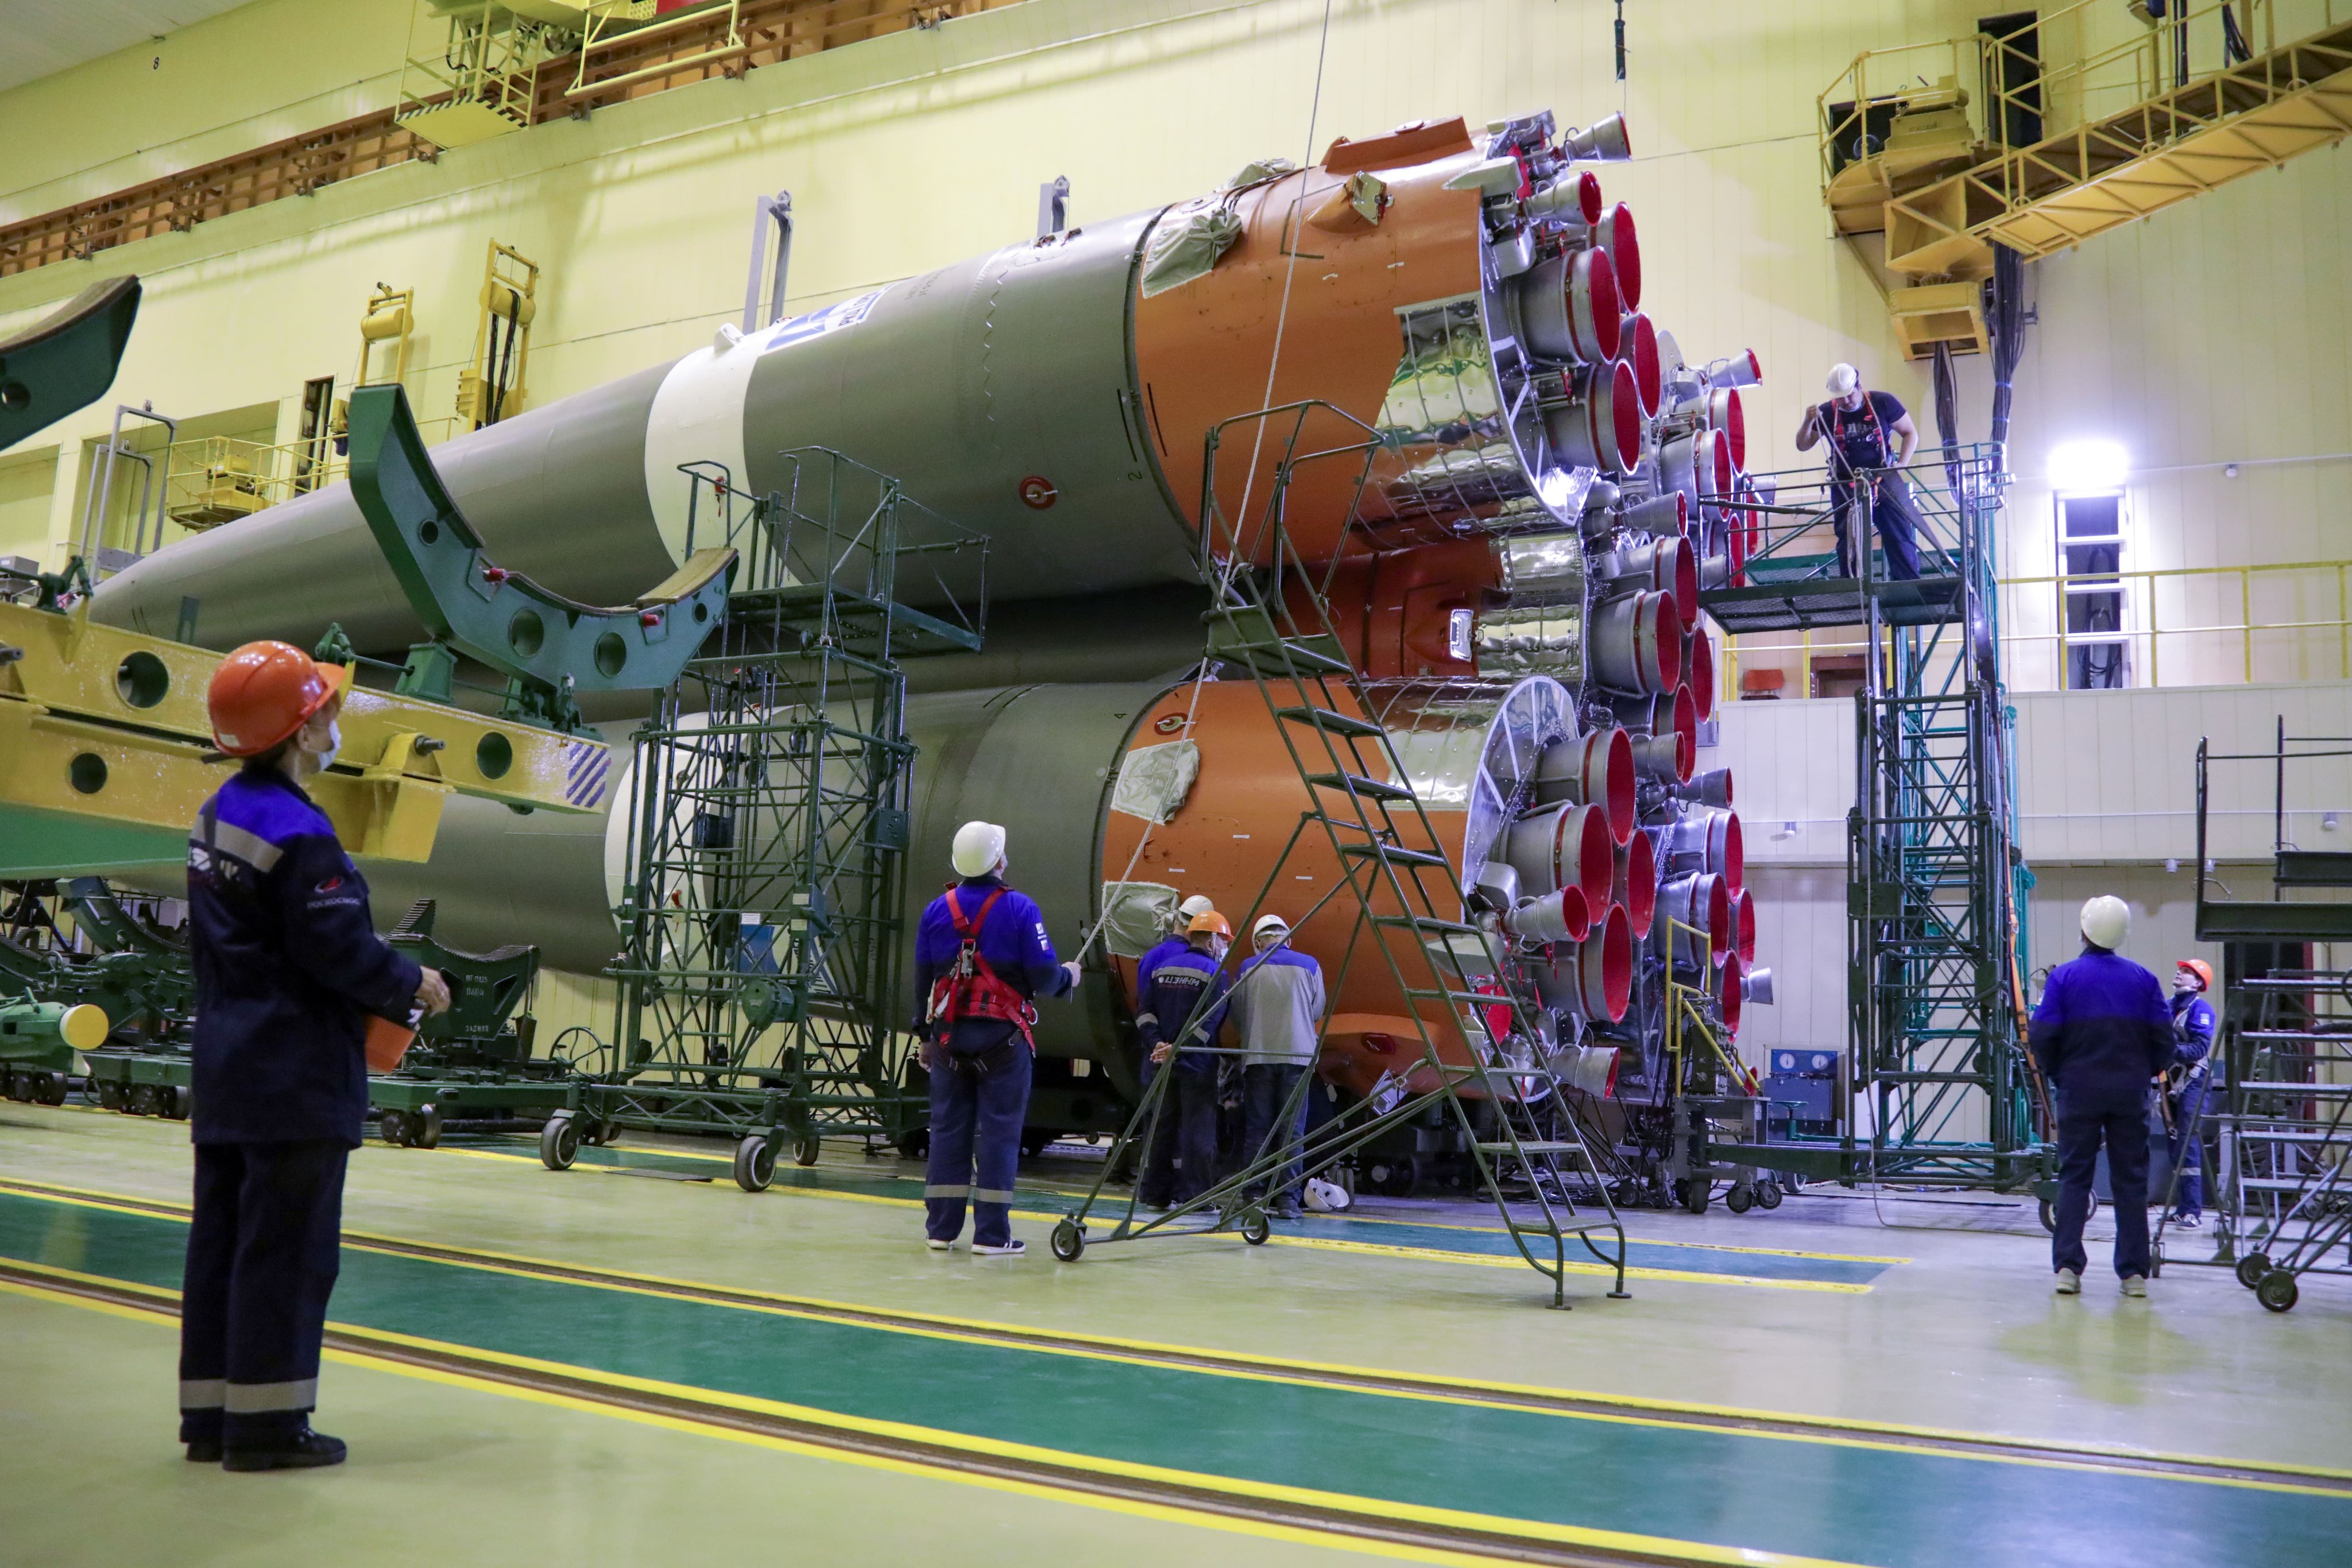 Technicians work on a Russian Soyuz rocket at Baikonur Cosmodrome in Kazakhstan. This Soyuz is scheduled to launch 36 internet satellites for the company OneWeb on March 4, 2022.